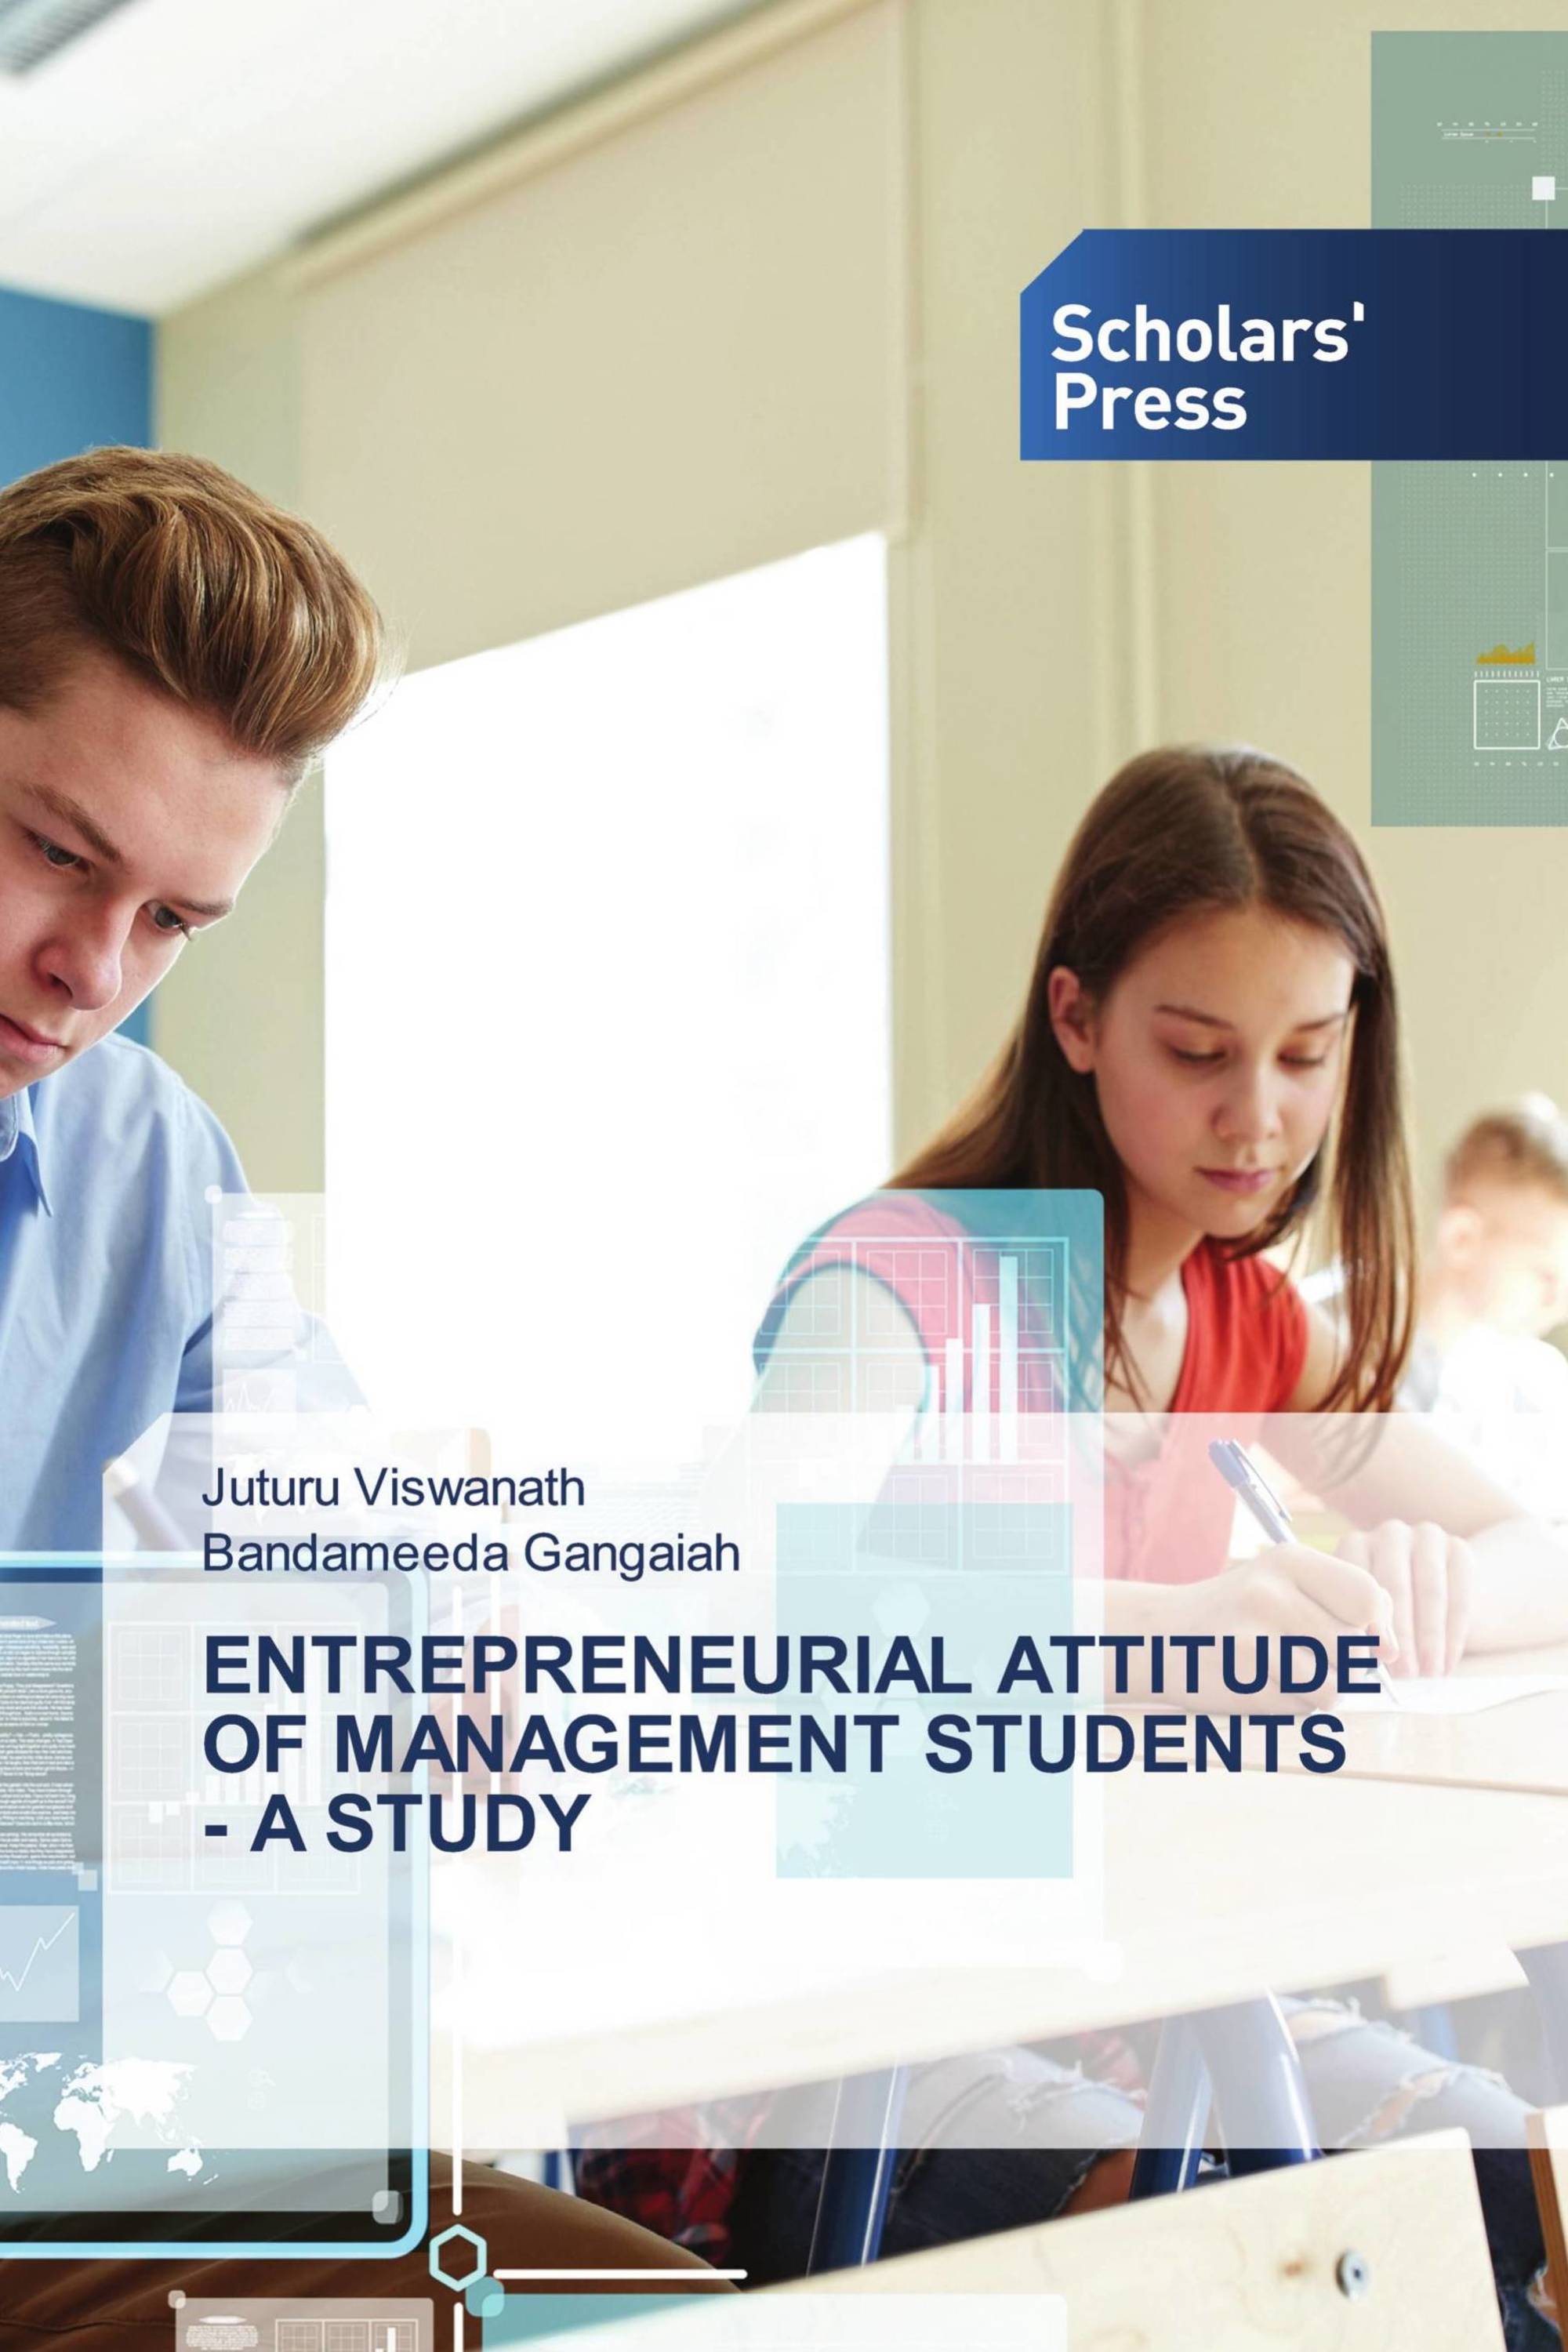 ENTREPRENEURIAL ATTITUDE OF MANAGEMENT STUDENTS - A STUDY